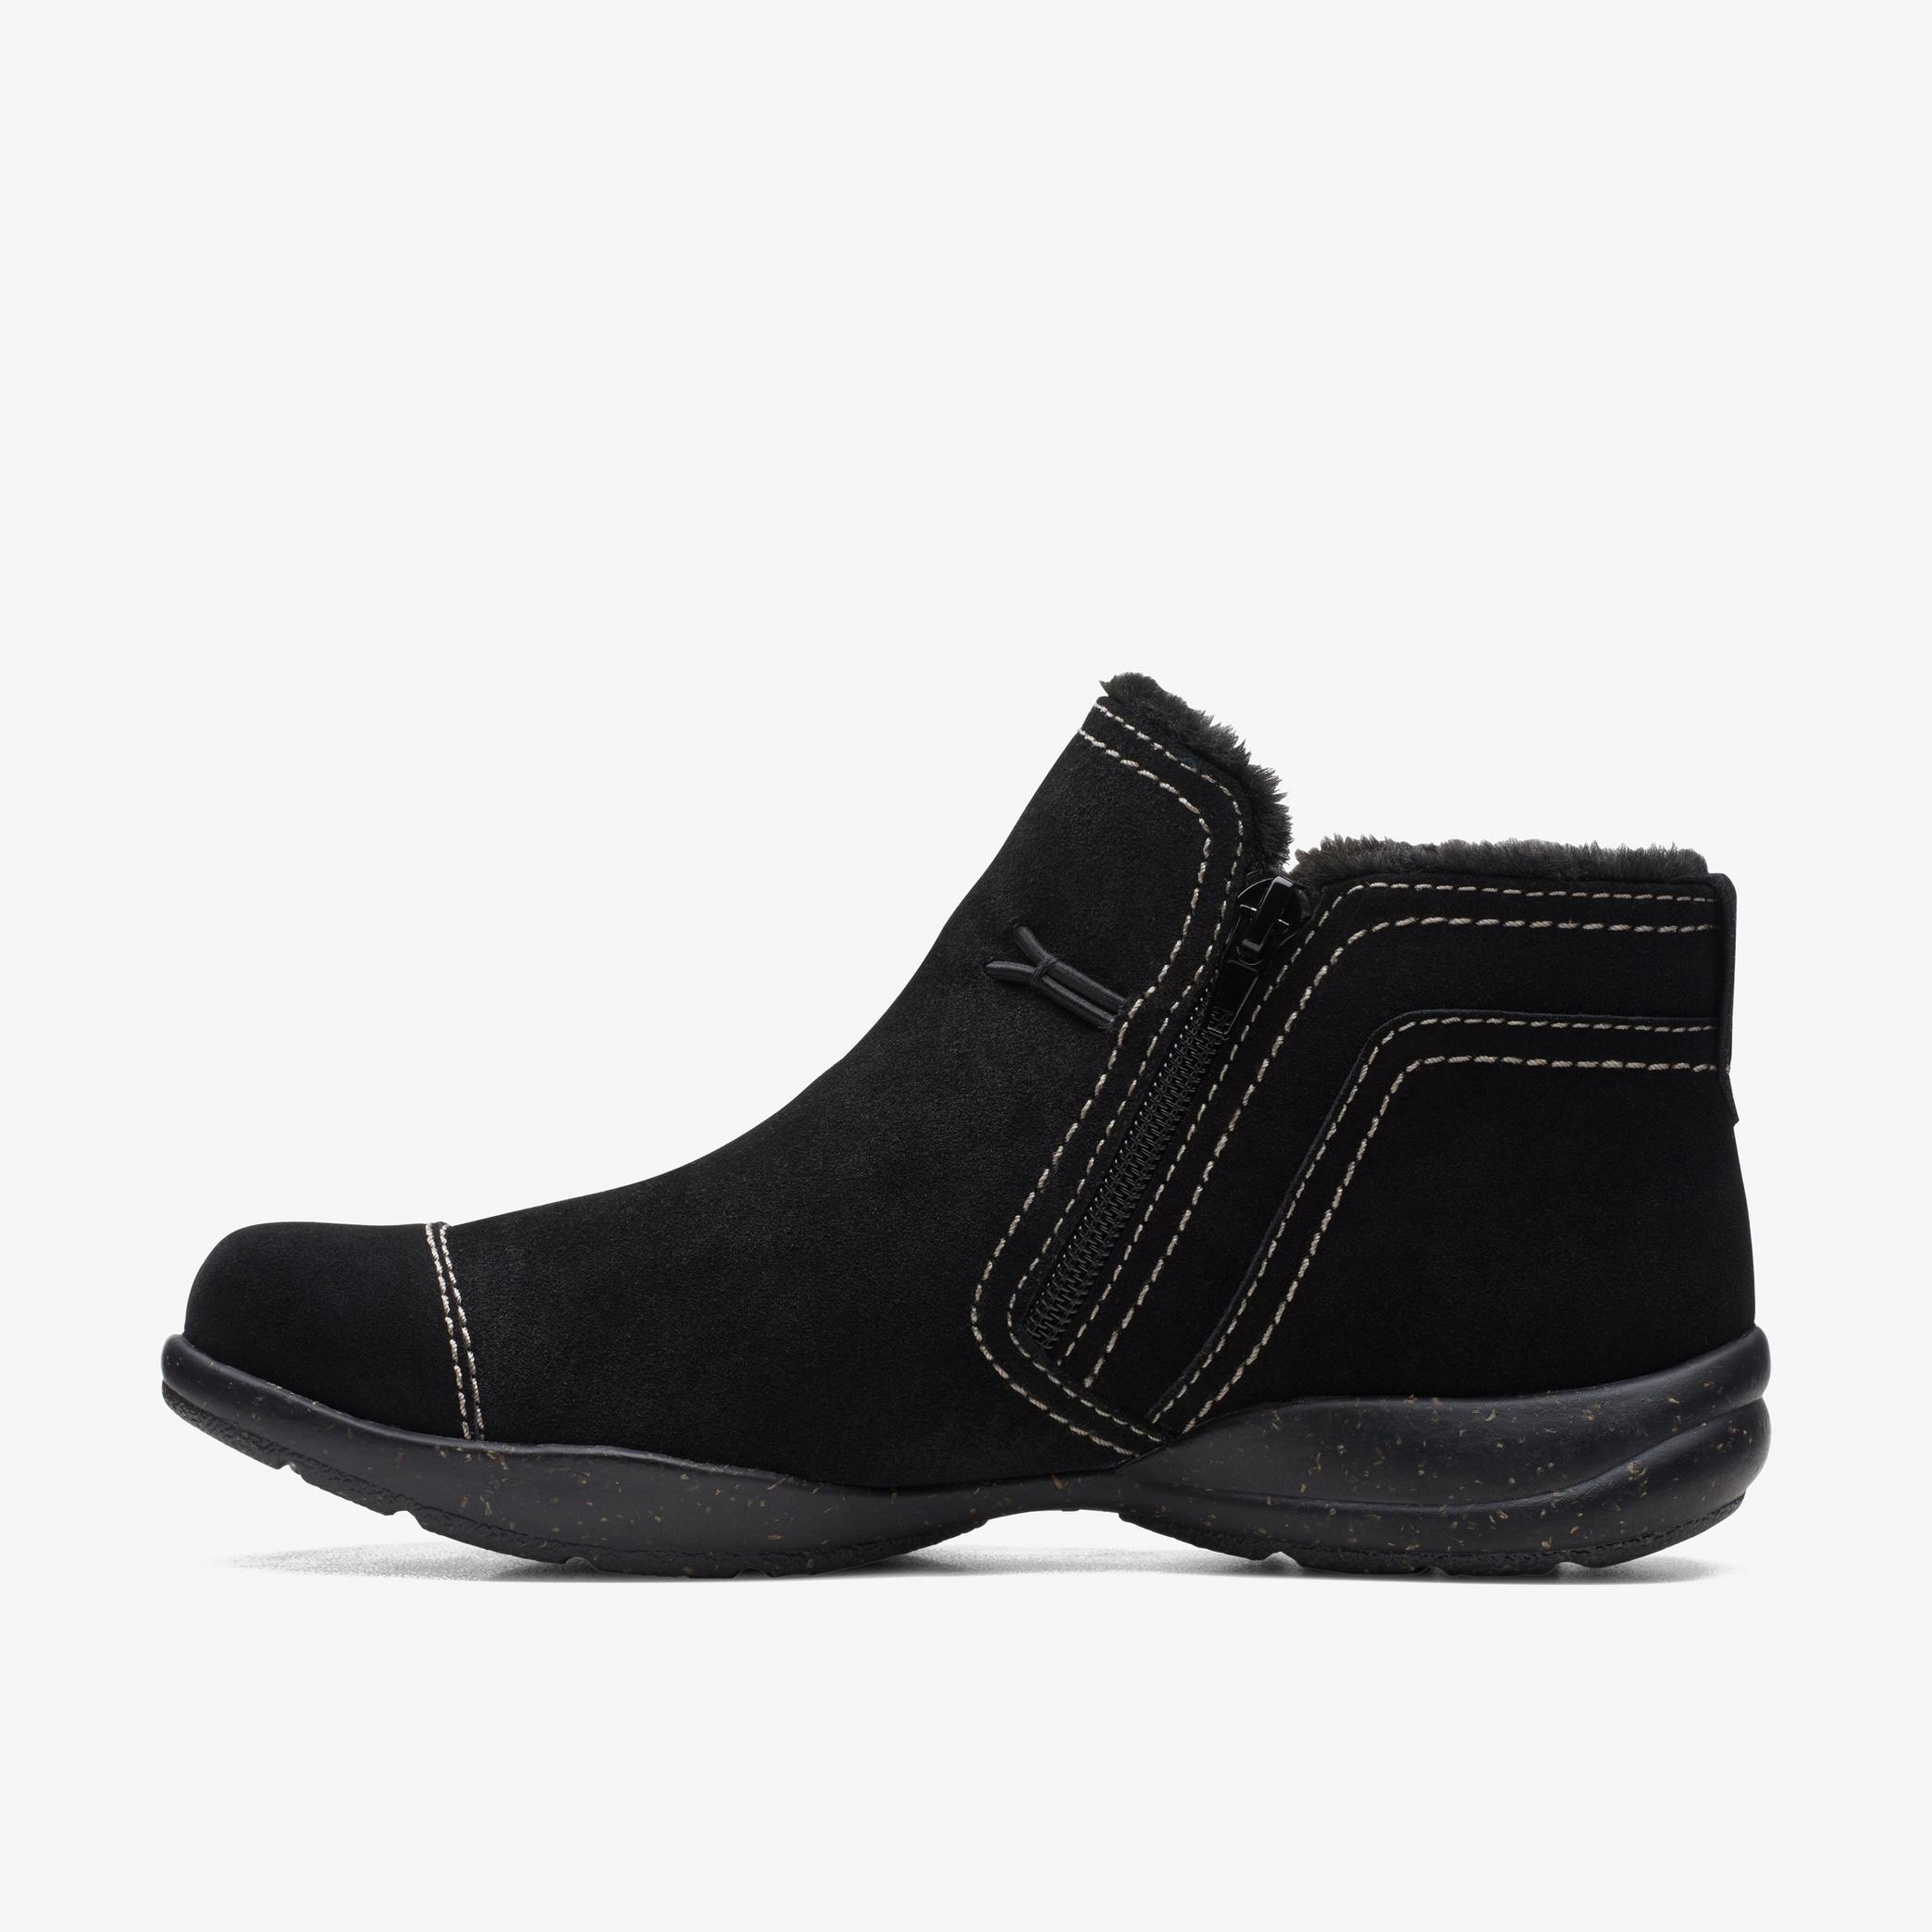 Roseville Aster Black Suede Ankle Boots, view 2 of 6